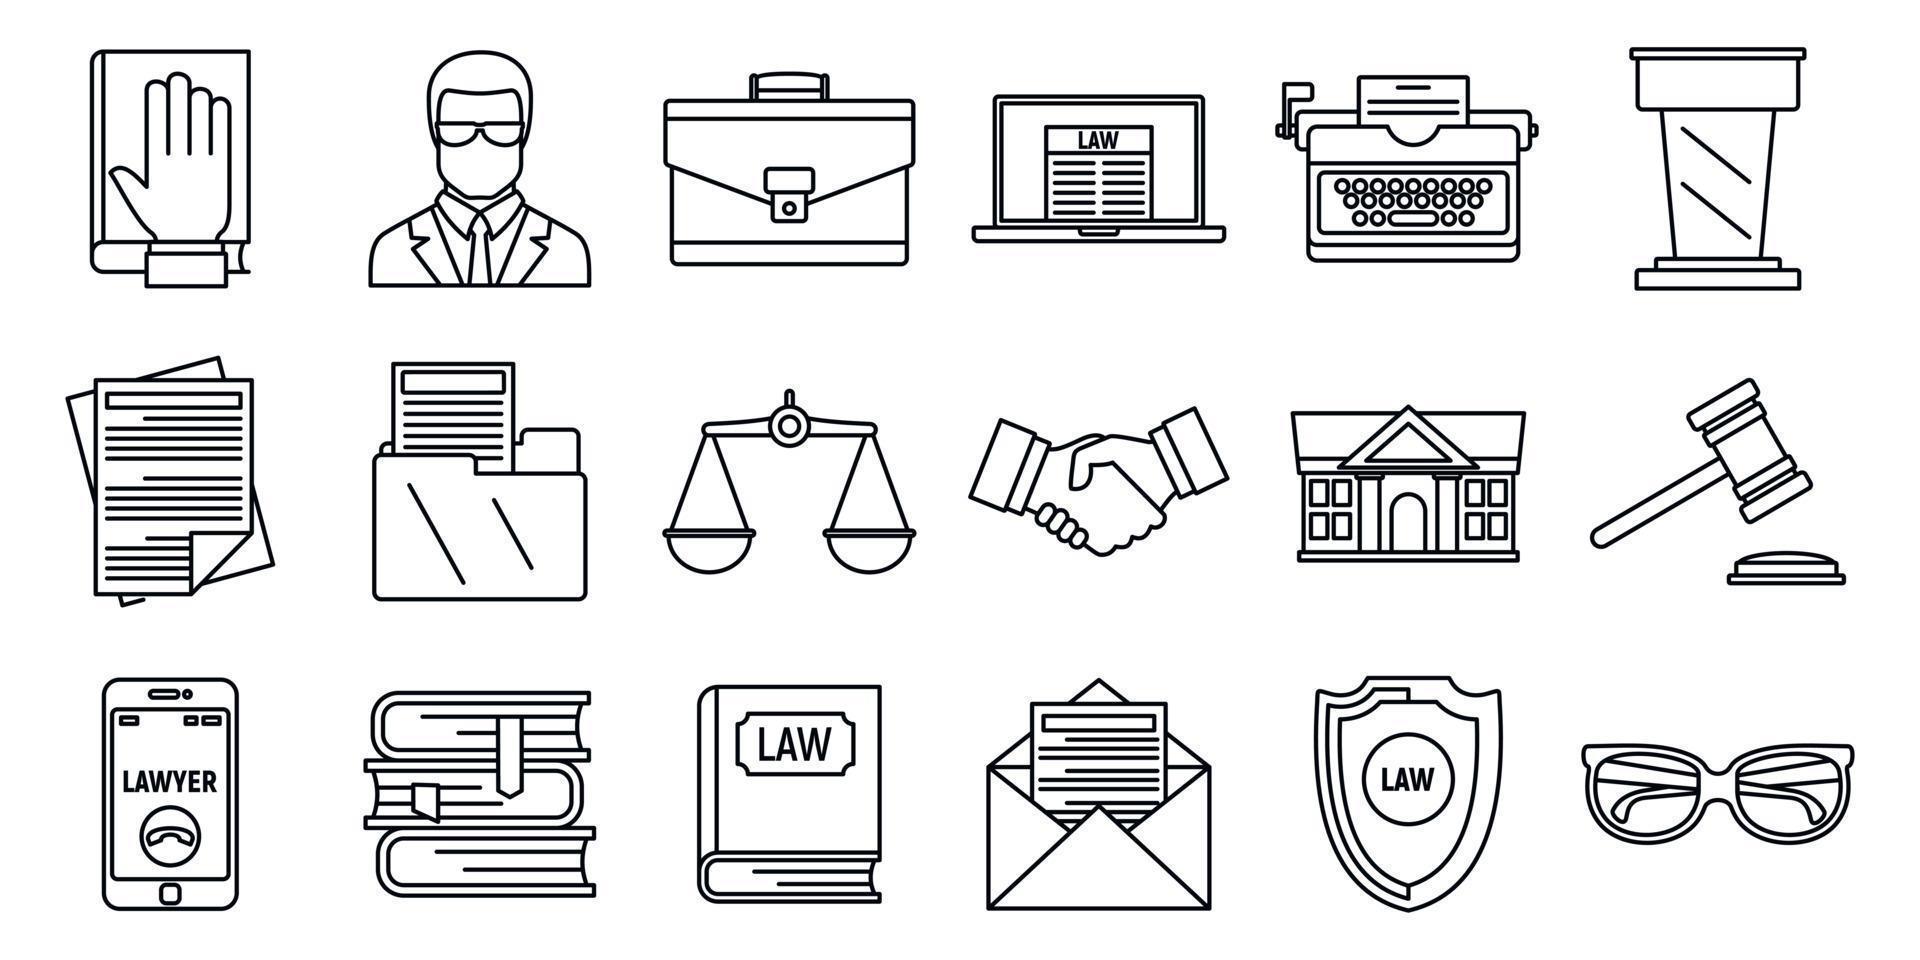 Lawyer justice icons set, outline style vector